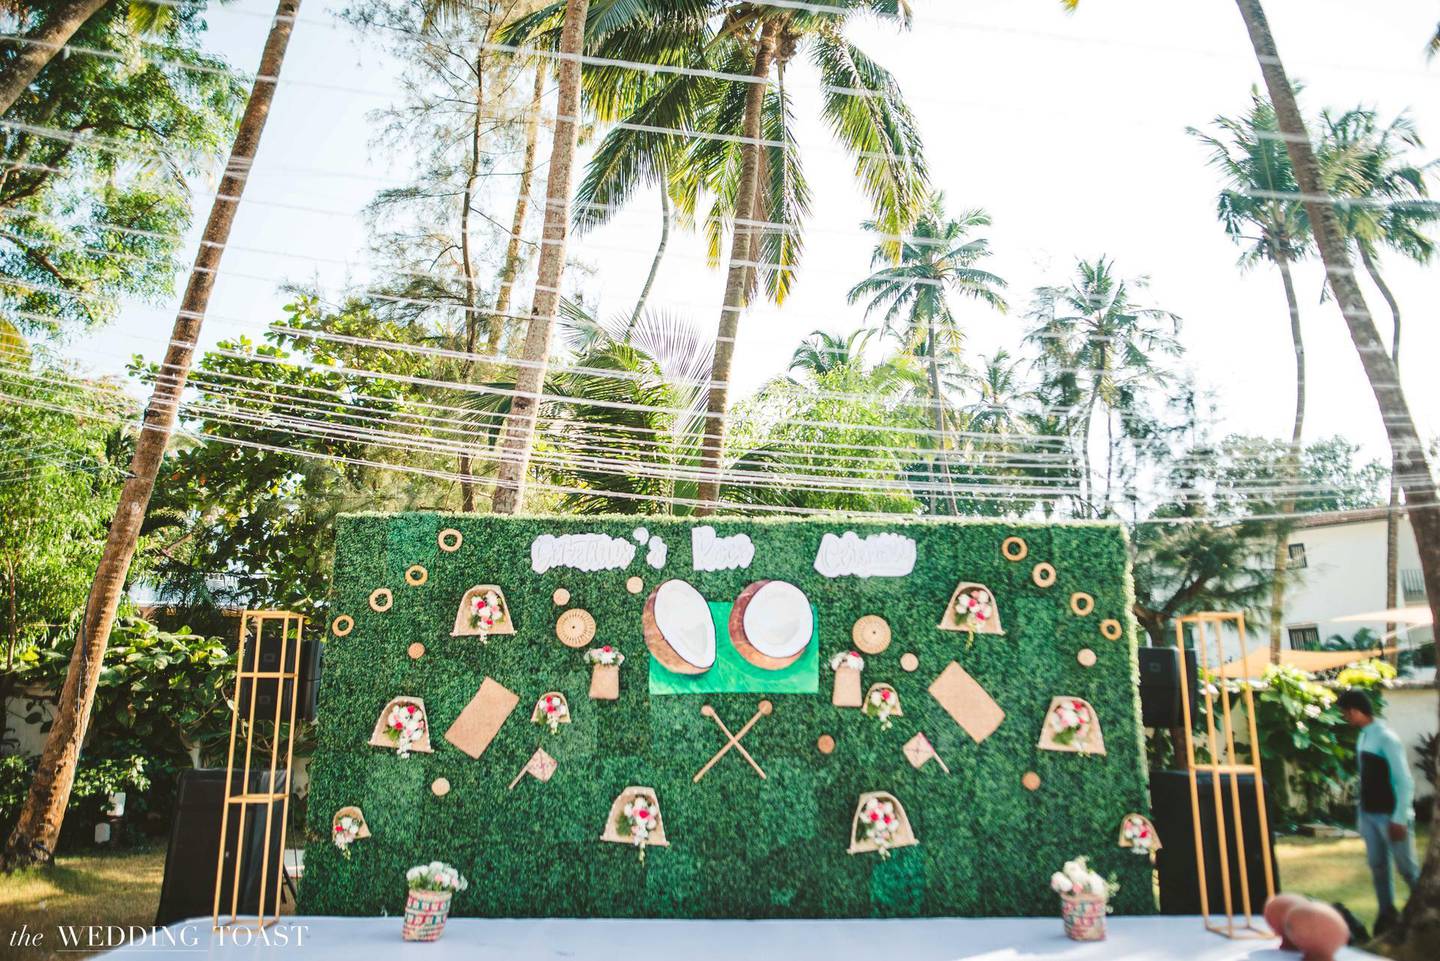 Alisha Mishra and Demetrius Pais used coconut shells instead of thermocol to create the backdrop at their ceremony. Courtesy The Wedding Toast 